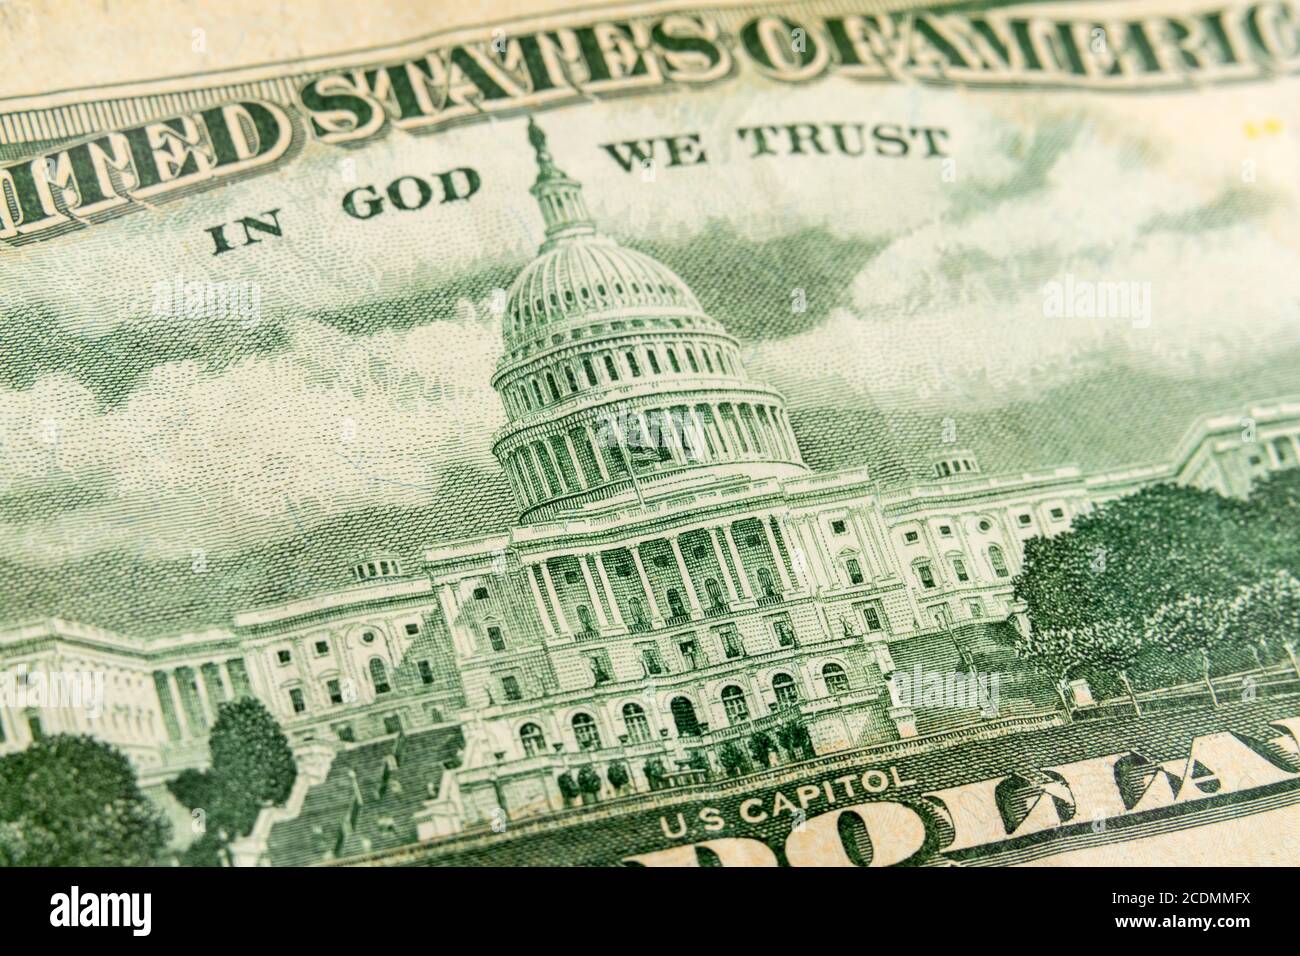 Macro photograph of the US Capitol building on back of a fifty dollar bill. Stock Photo